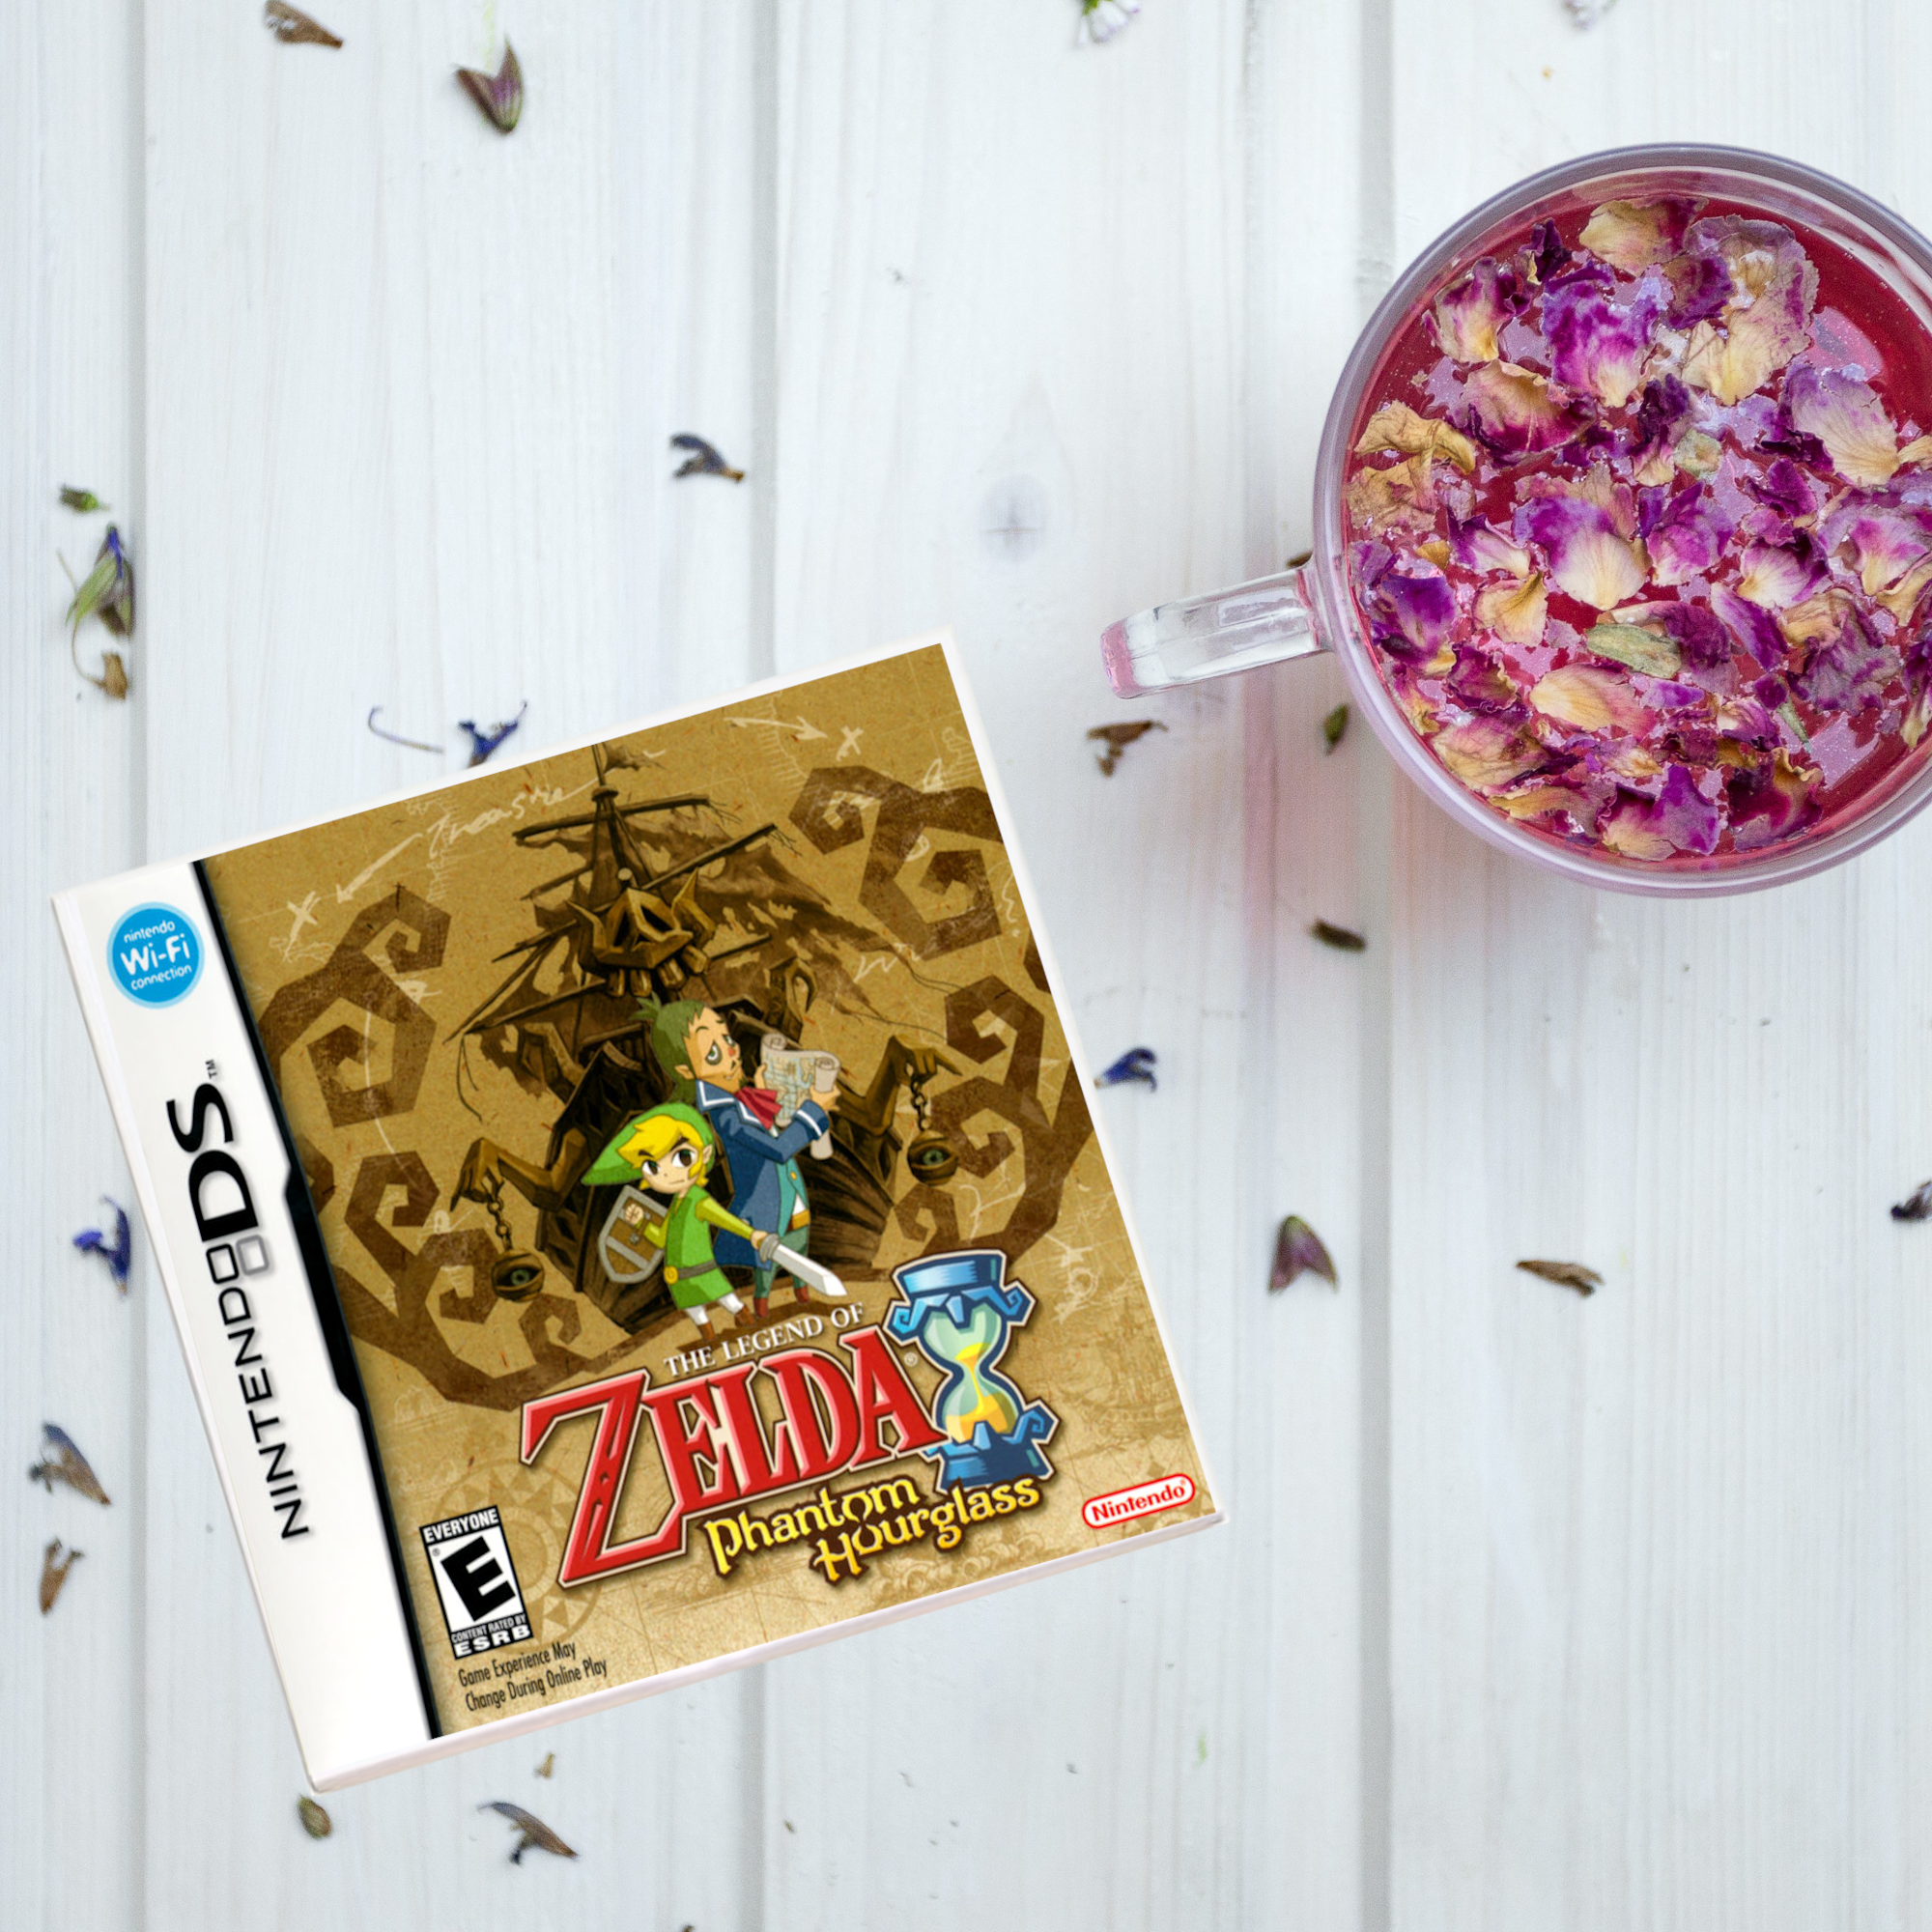 The Legend Of Zelda Turns 35 Today. Here's A Look At How Princess Zelda  Influenced Beauty Culture